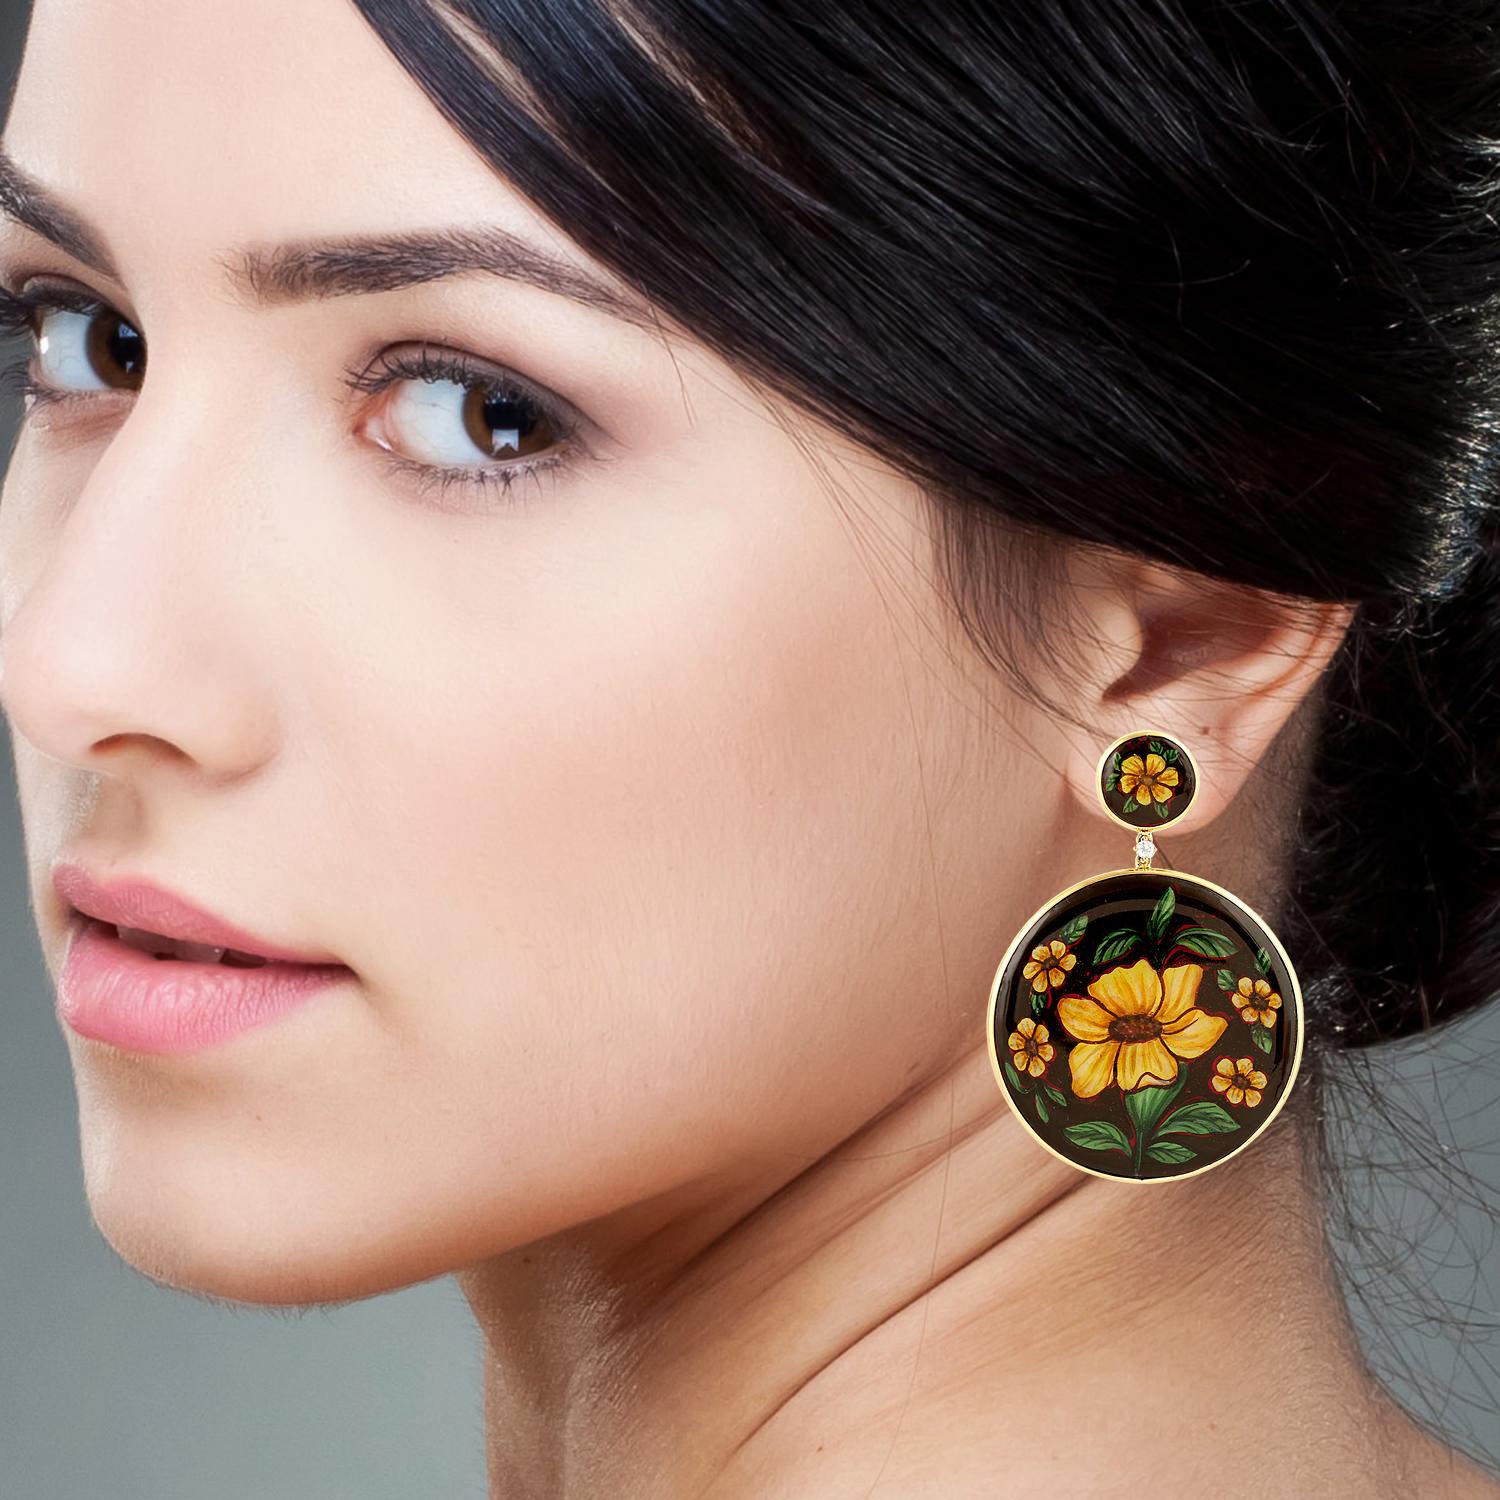 These beautiful earrings features unique hand painted miniature art set in 18K gold.  It is set in 56.15 carats bakelite & .15 carats diamonds.

FOLLOW  MEGHNA JEWELS storefront to view the latest collection & exclusive pieces.  Meghna Jewels is